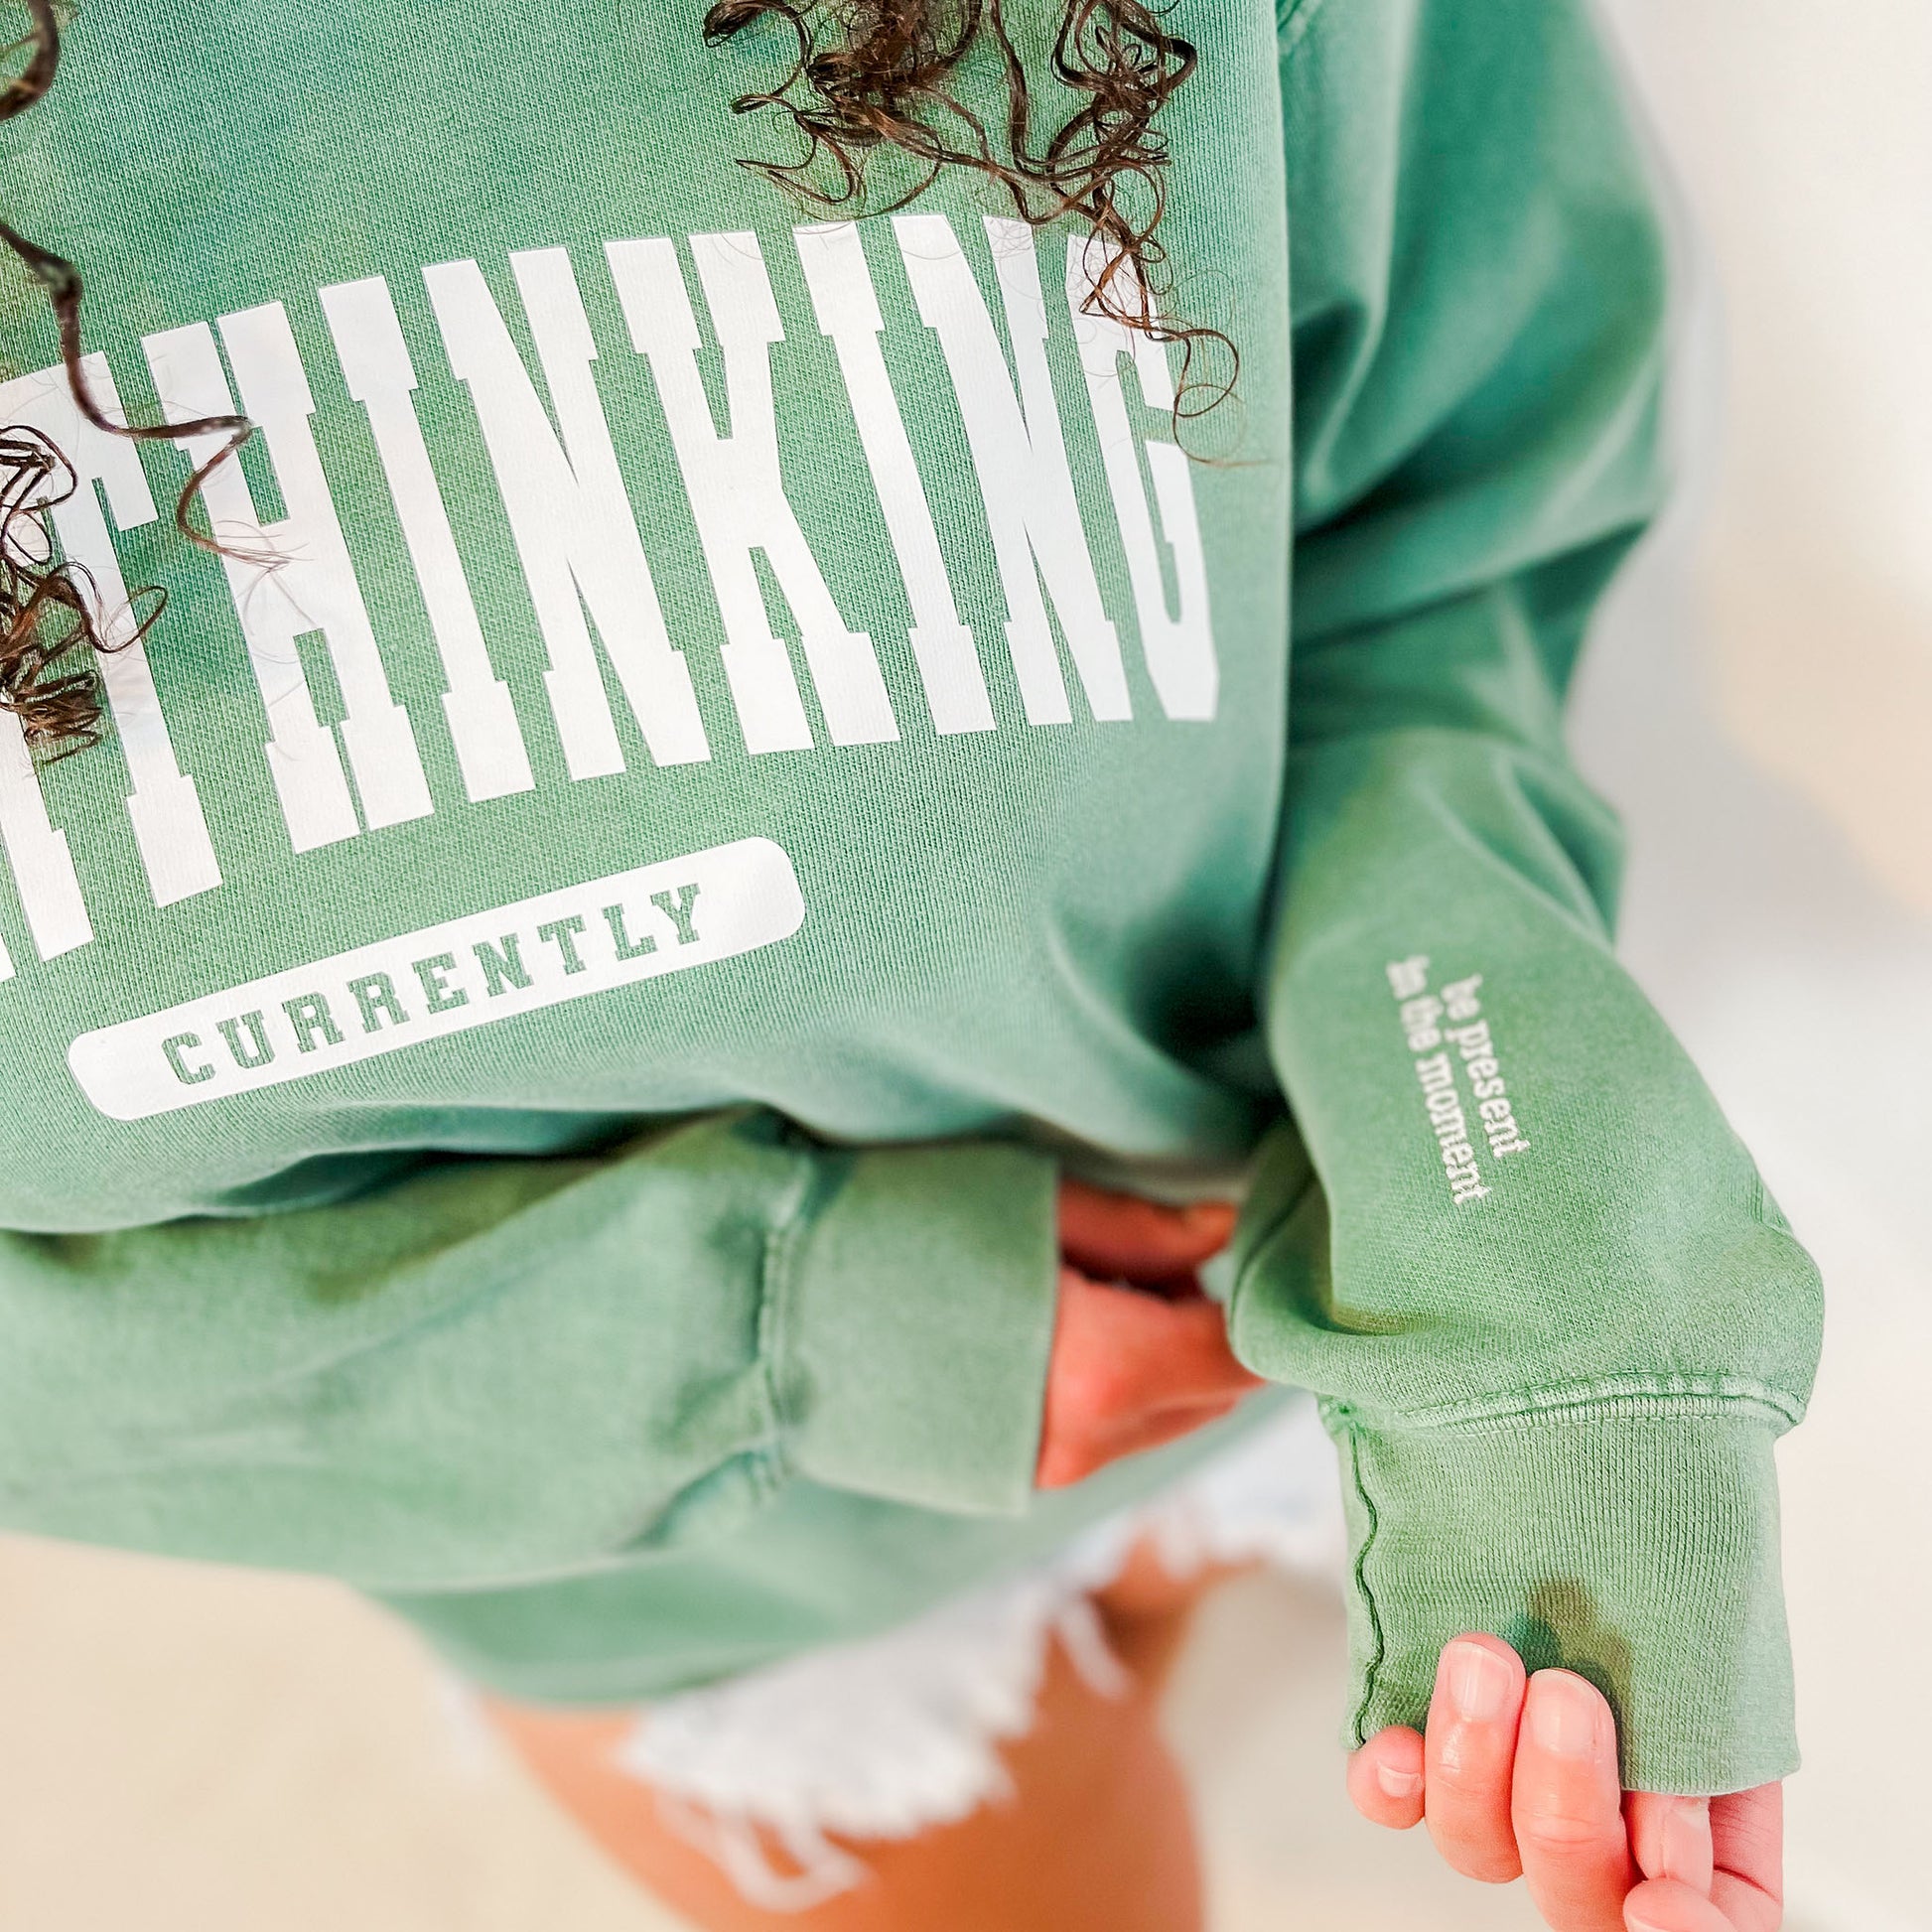 The model is wearing a light green vintage-washed crewneck sweatshirt with the words "CURRENTLY OVERTHINKING" printed in capitalized athletic-style lettering. This design is placed in the centre of the sweater, 4" below the collar. On the bottom left sleeve are the embroidered words: be present in the moment. 